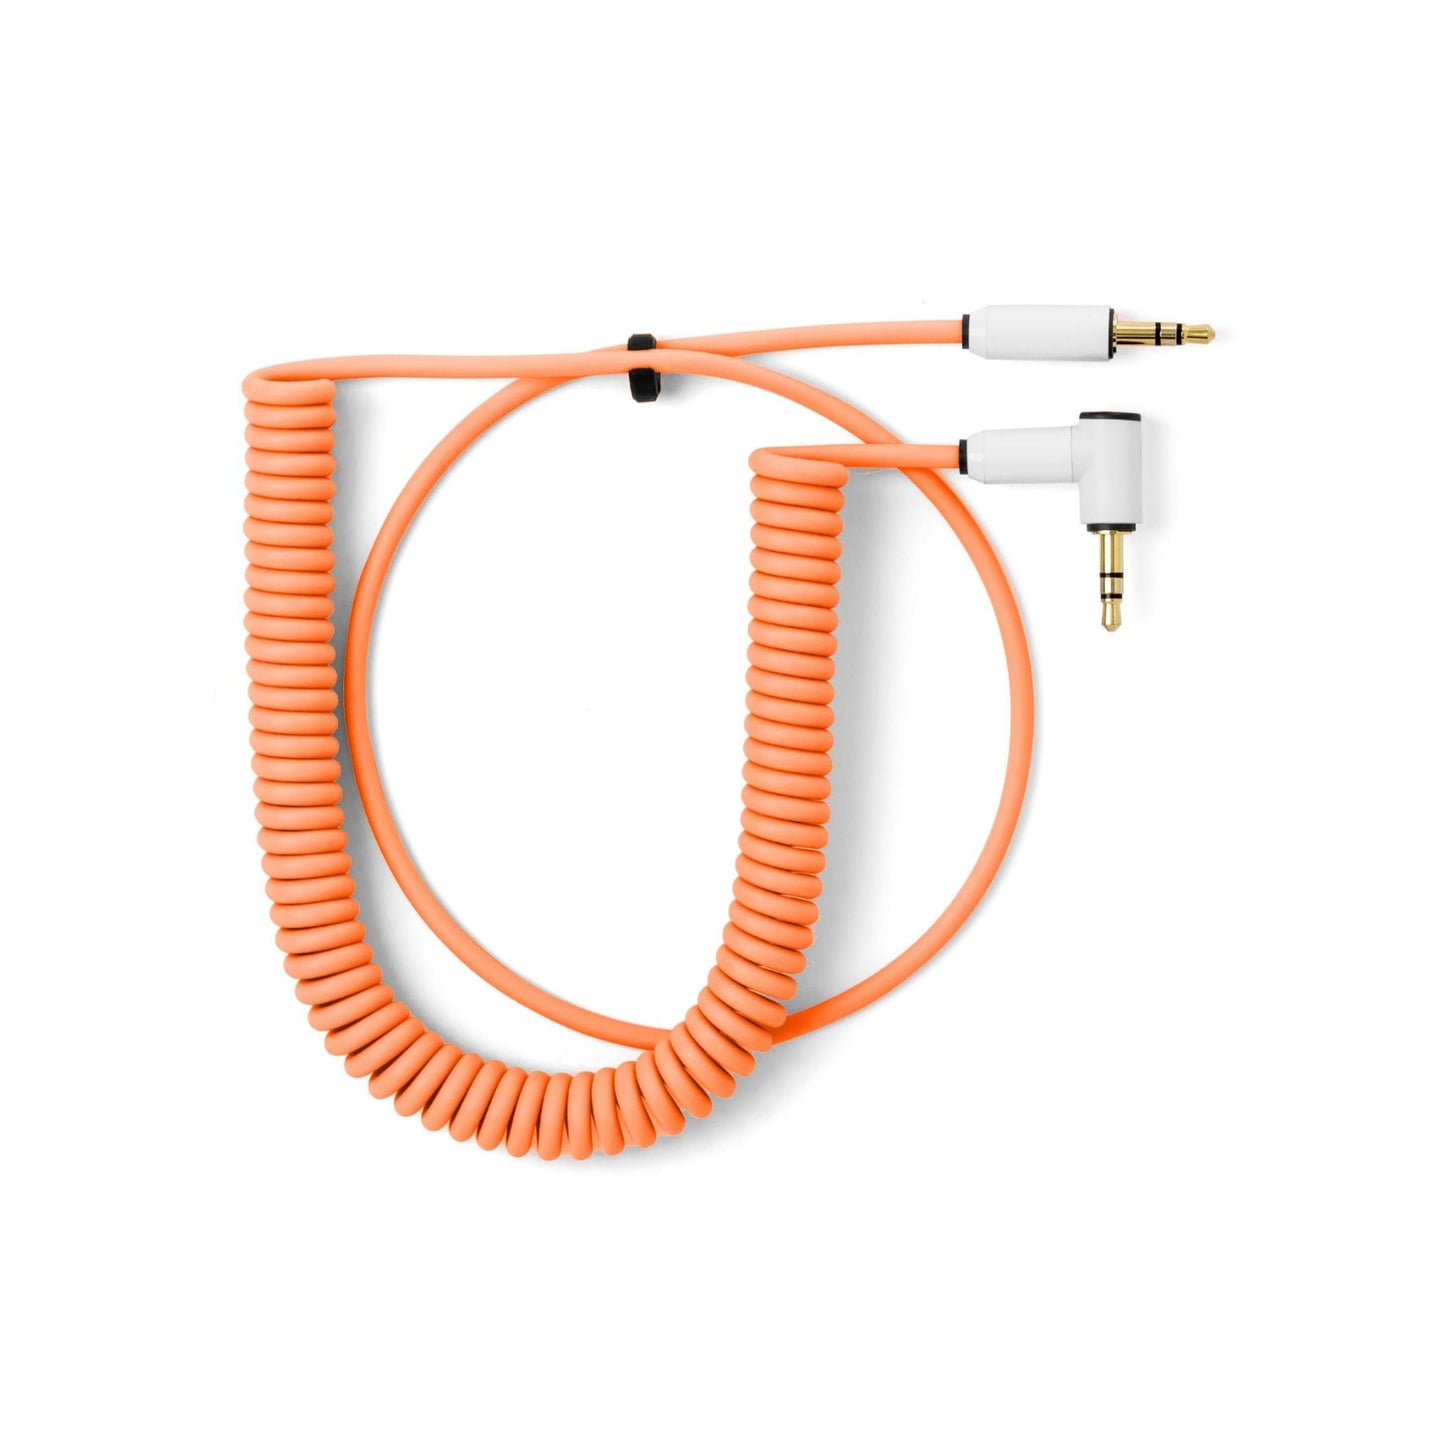 Candycords - OP-1 / OP-Z Special Audio Cable (3.5mm) - Curly 65cm to 90cm